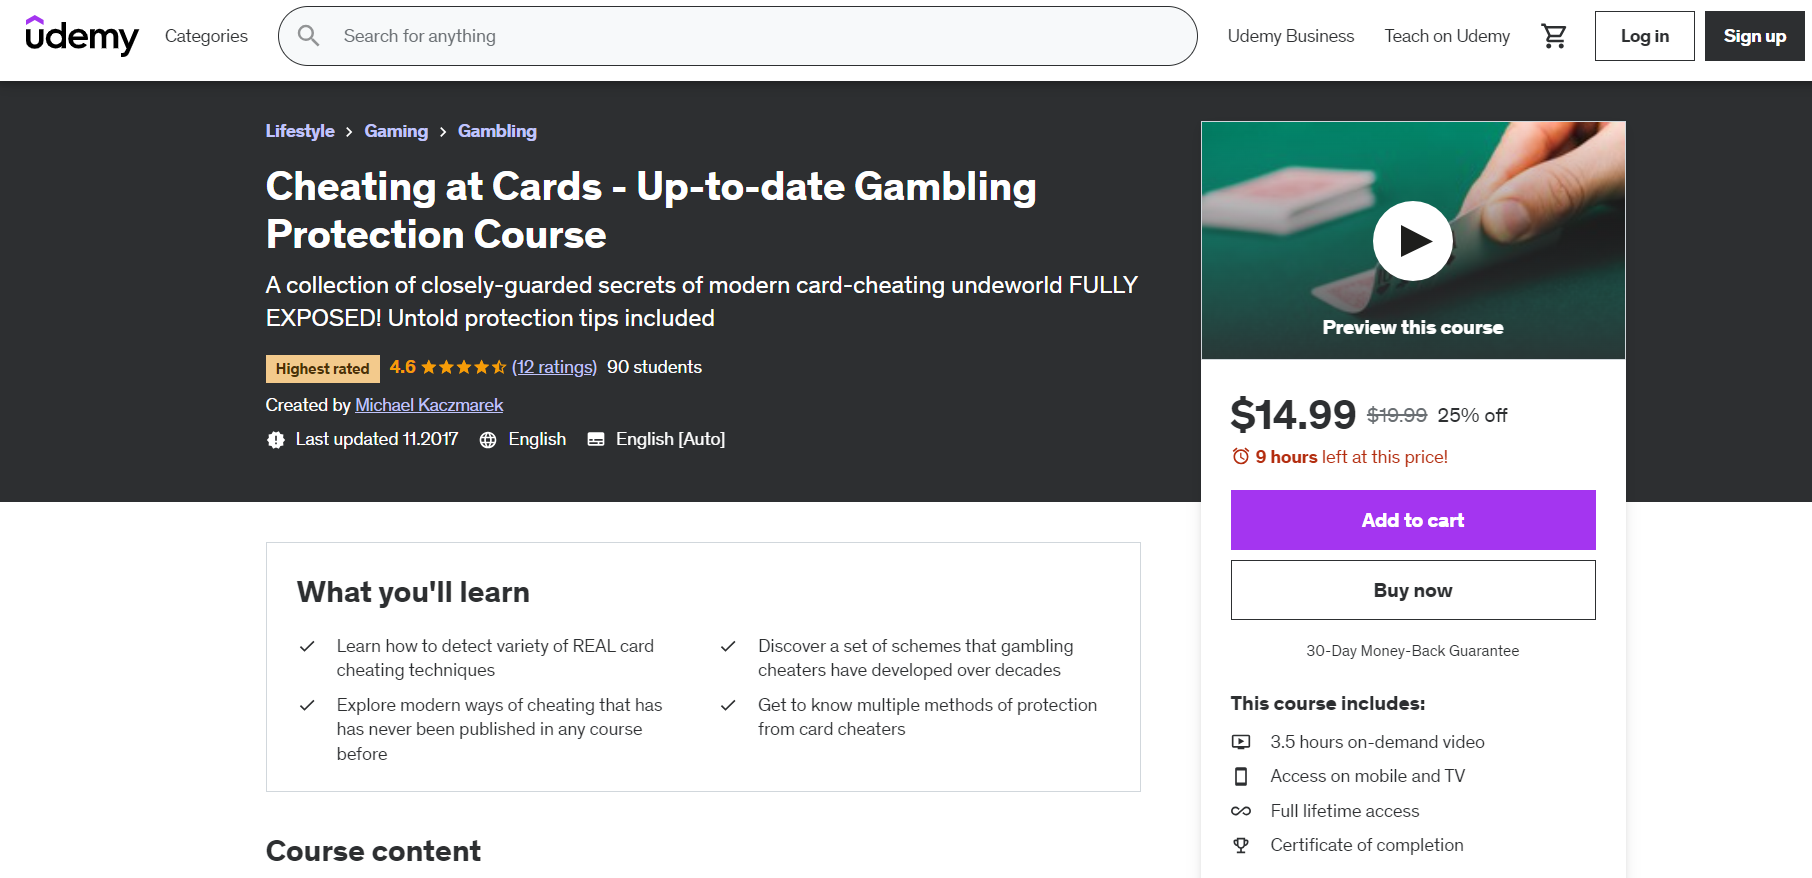 Cheating at Cards - Up-to-date Gambling Protection Course